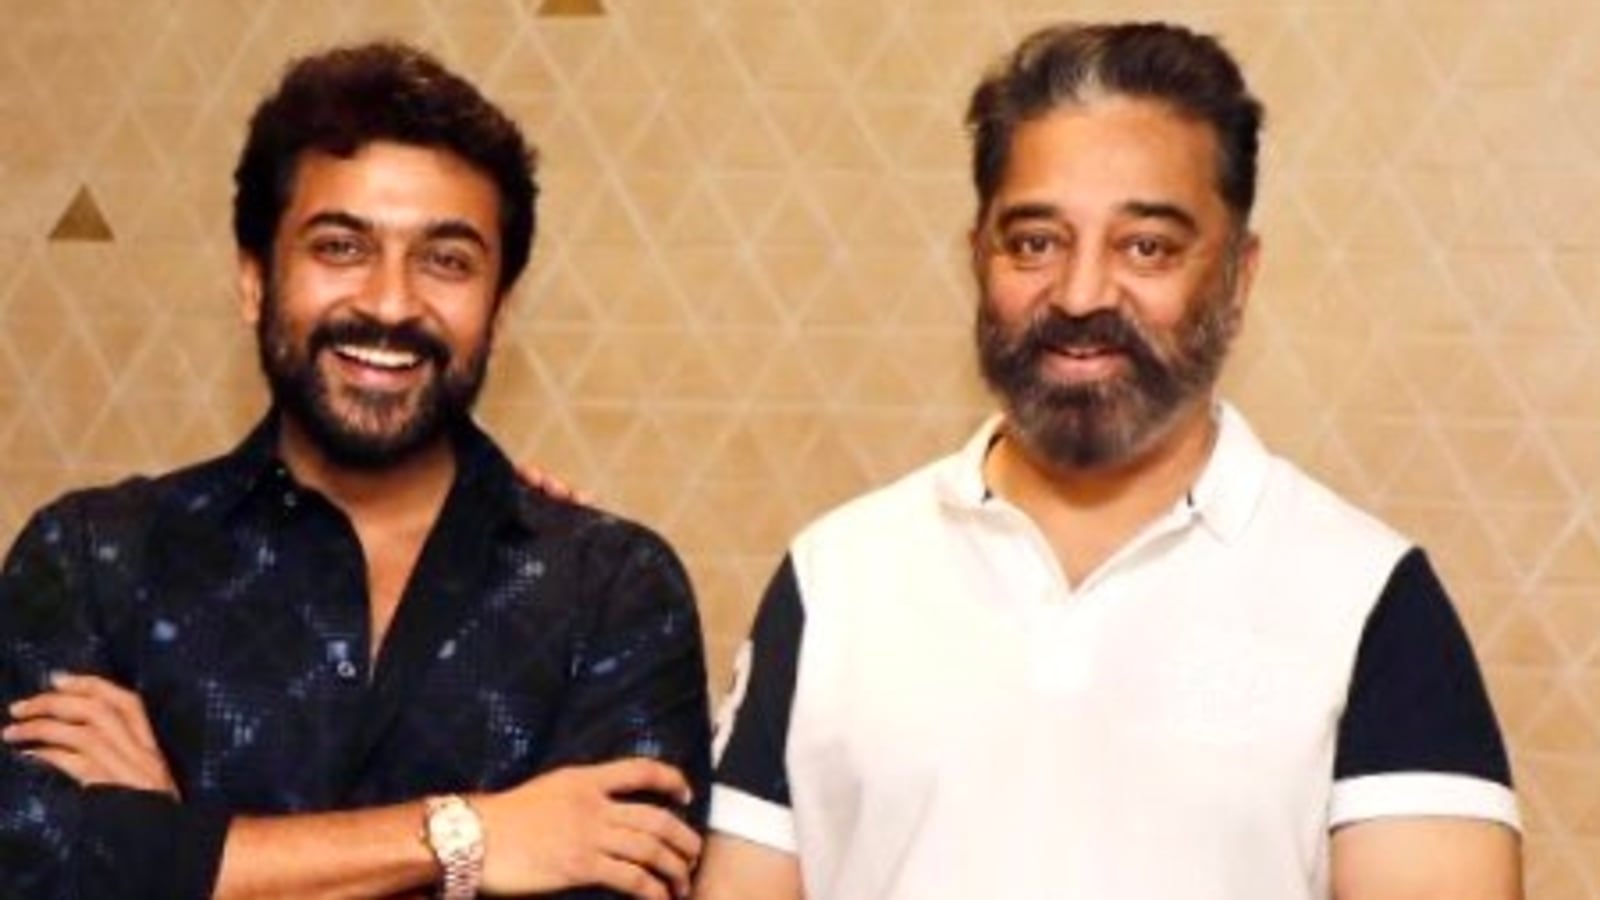 Suriya ‘humbly’ accepts The Academy’s invitation to join Oscars committee; Kamal Haasan says, ‘be proud brother’